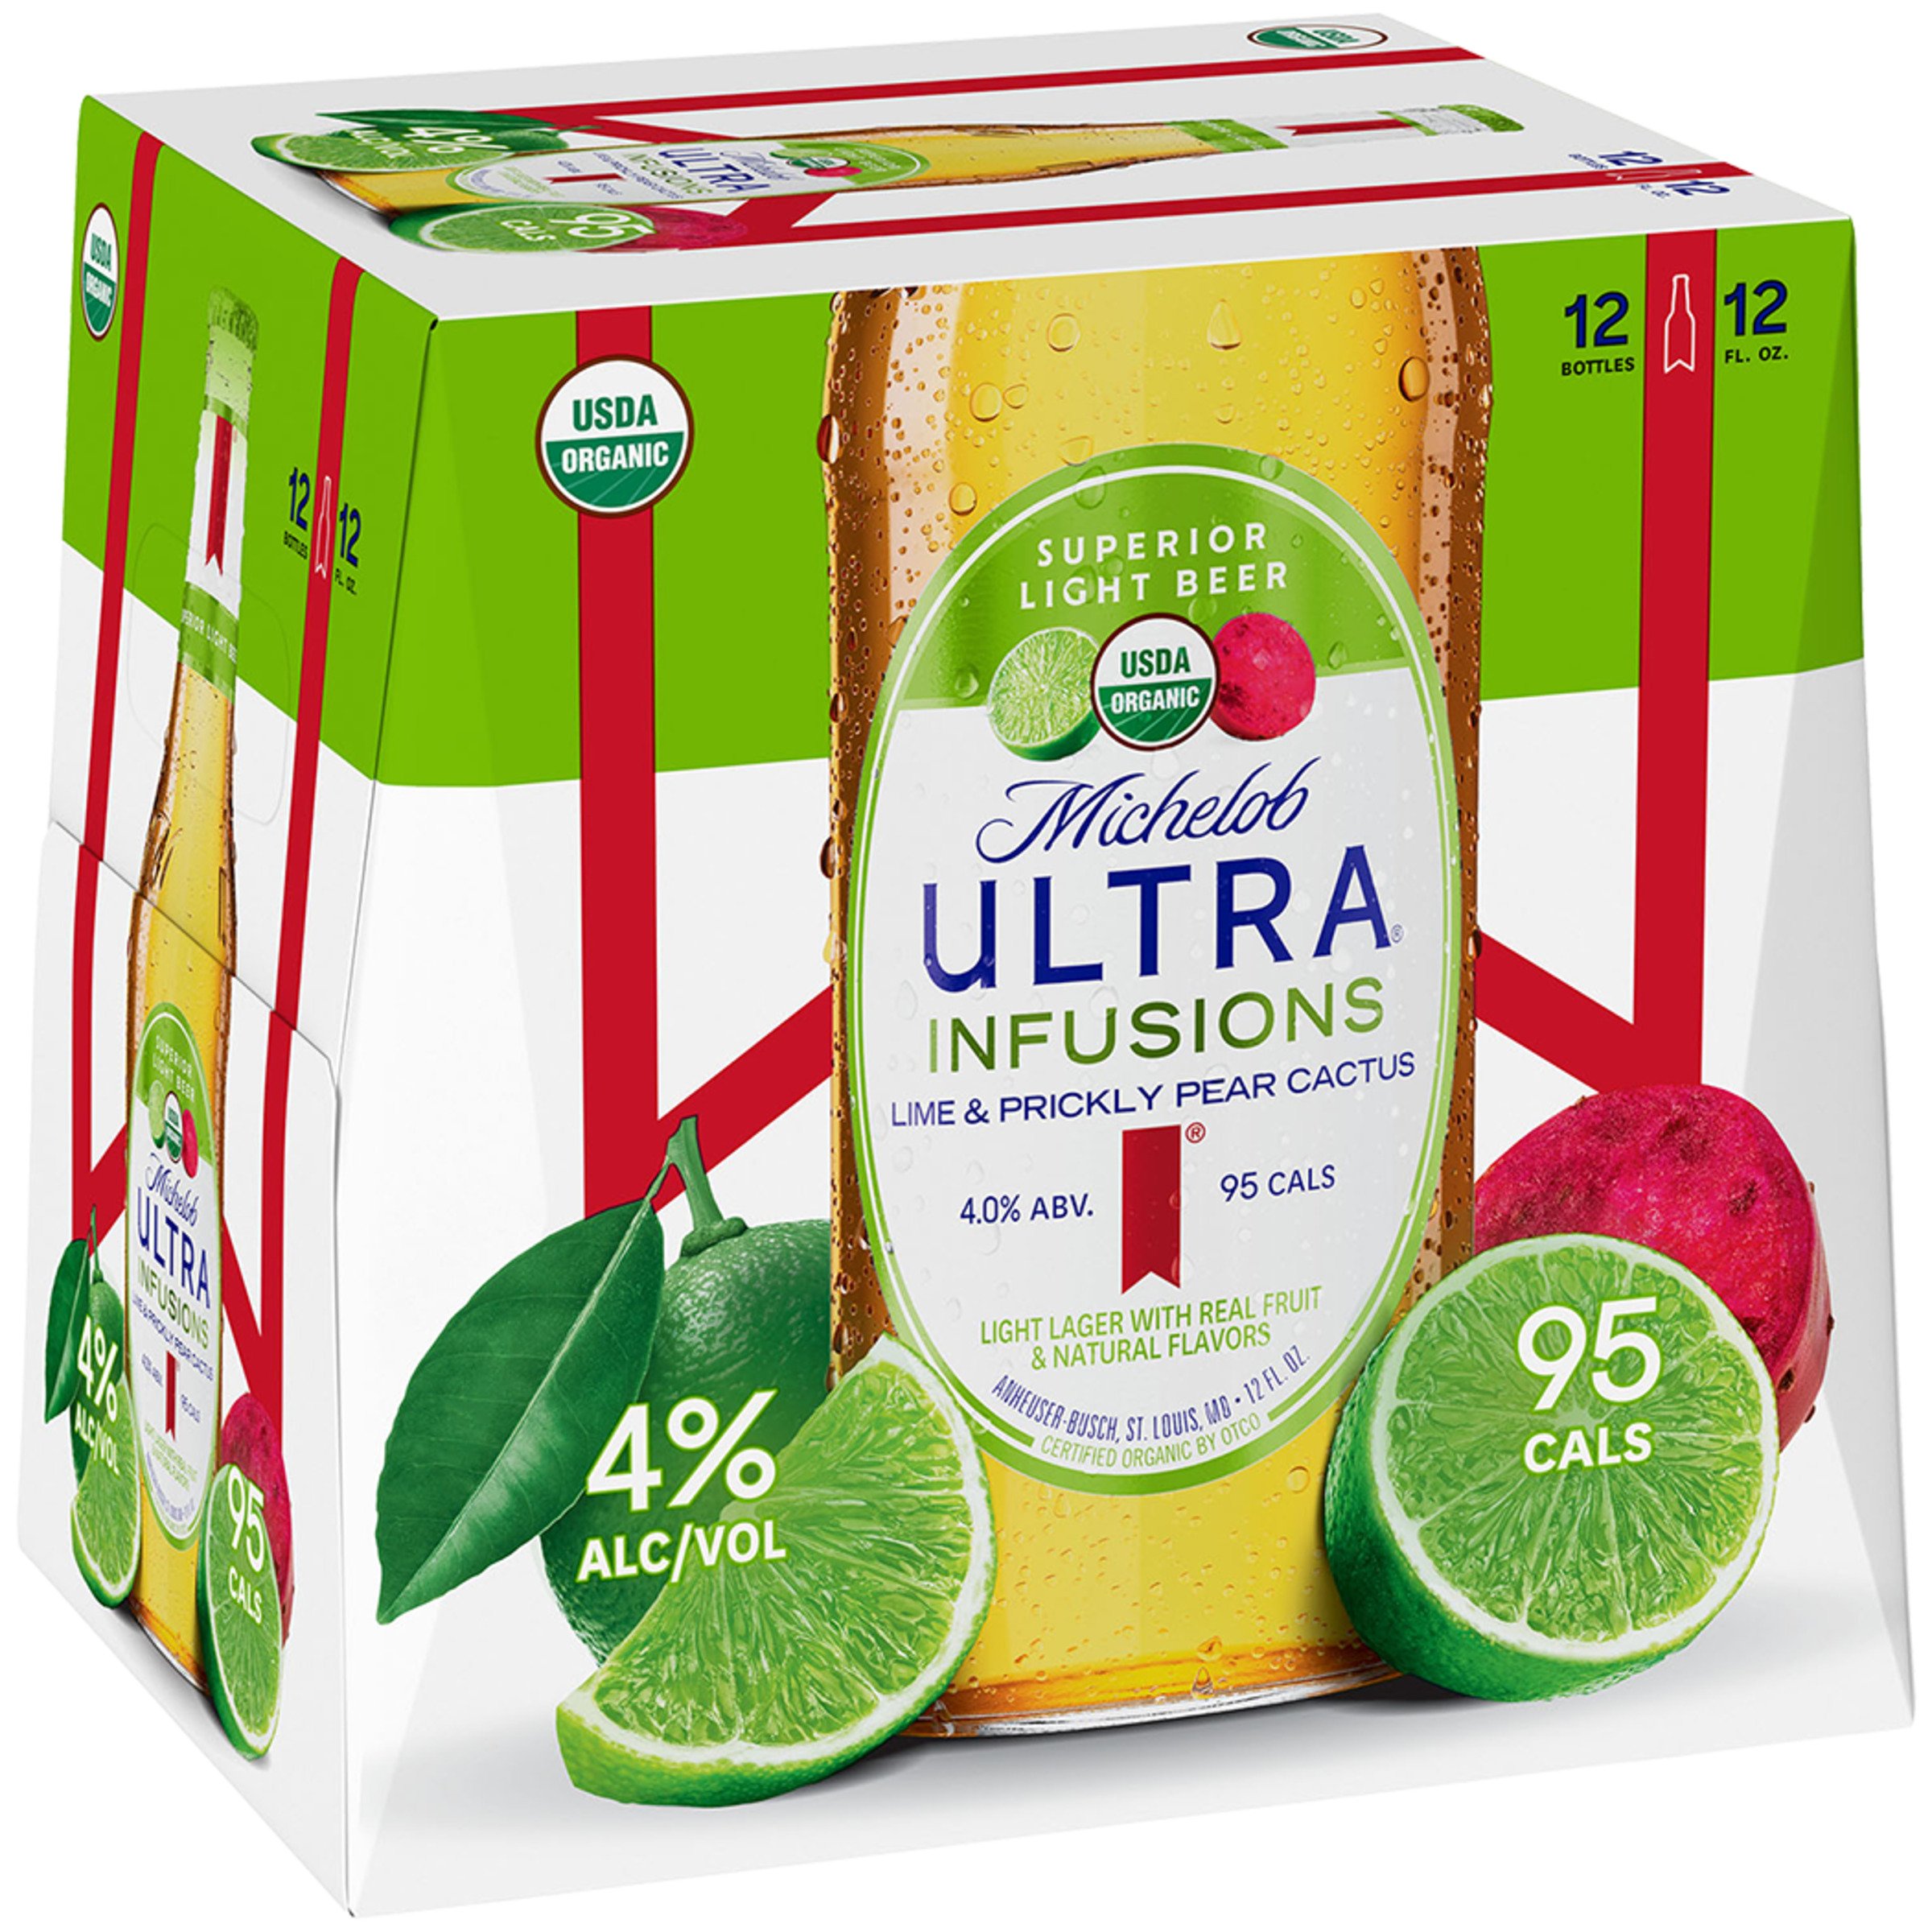 michelob-ultra-infusions-lime-prickly-pear-cactus-beer-12-oz-bottles